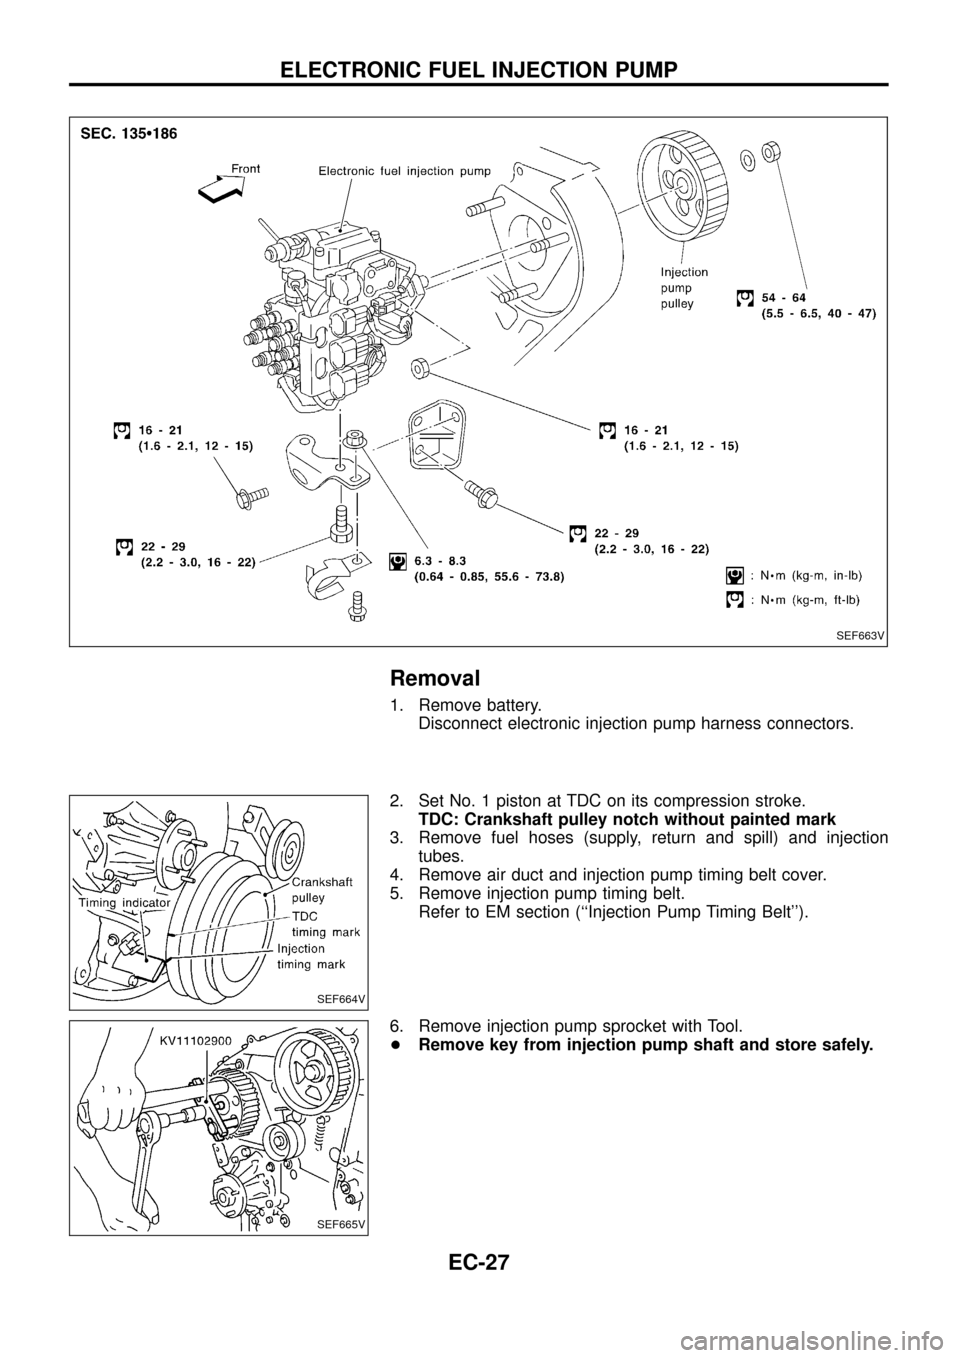 NISSAN PATROL 1998 Y61 / 5.G Engine Control Workshop Manual Removal
1. Remove battery.
Disconnect electronic injection pump harness connectors.
2. Set No. 1 piston at TDC on its compression stroke.
TDC: Crankshaft pulley notch without painted mark
3. Remove fu